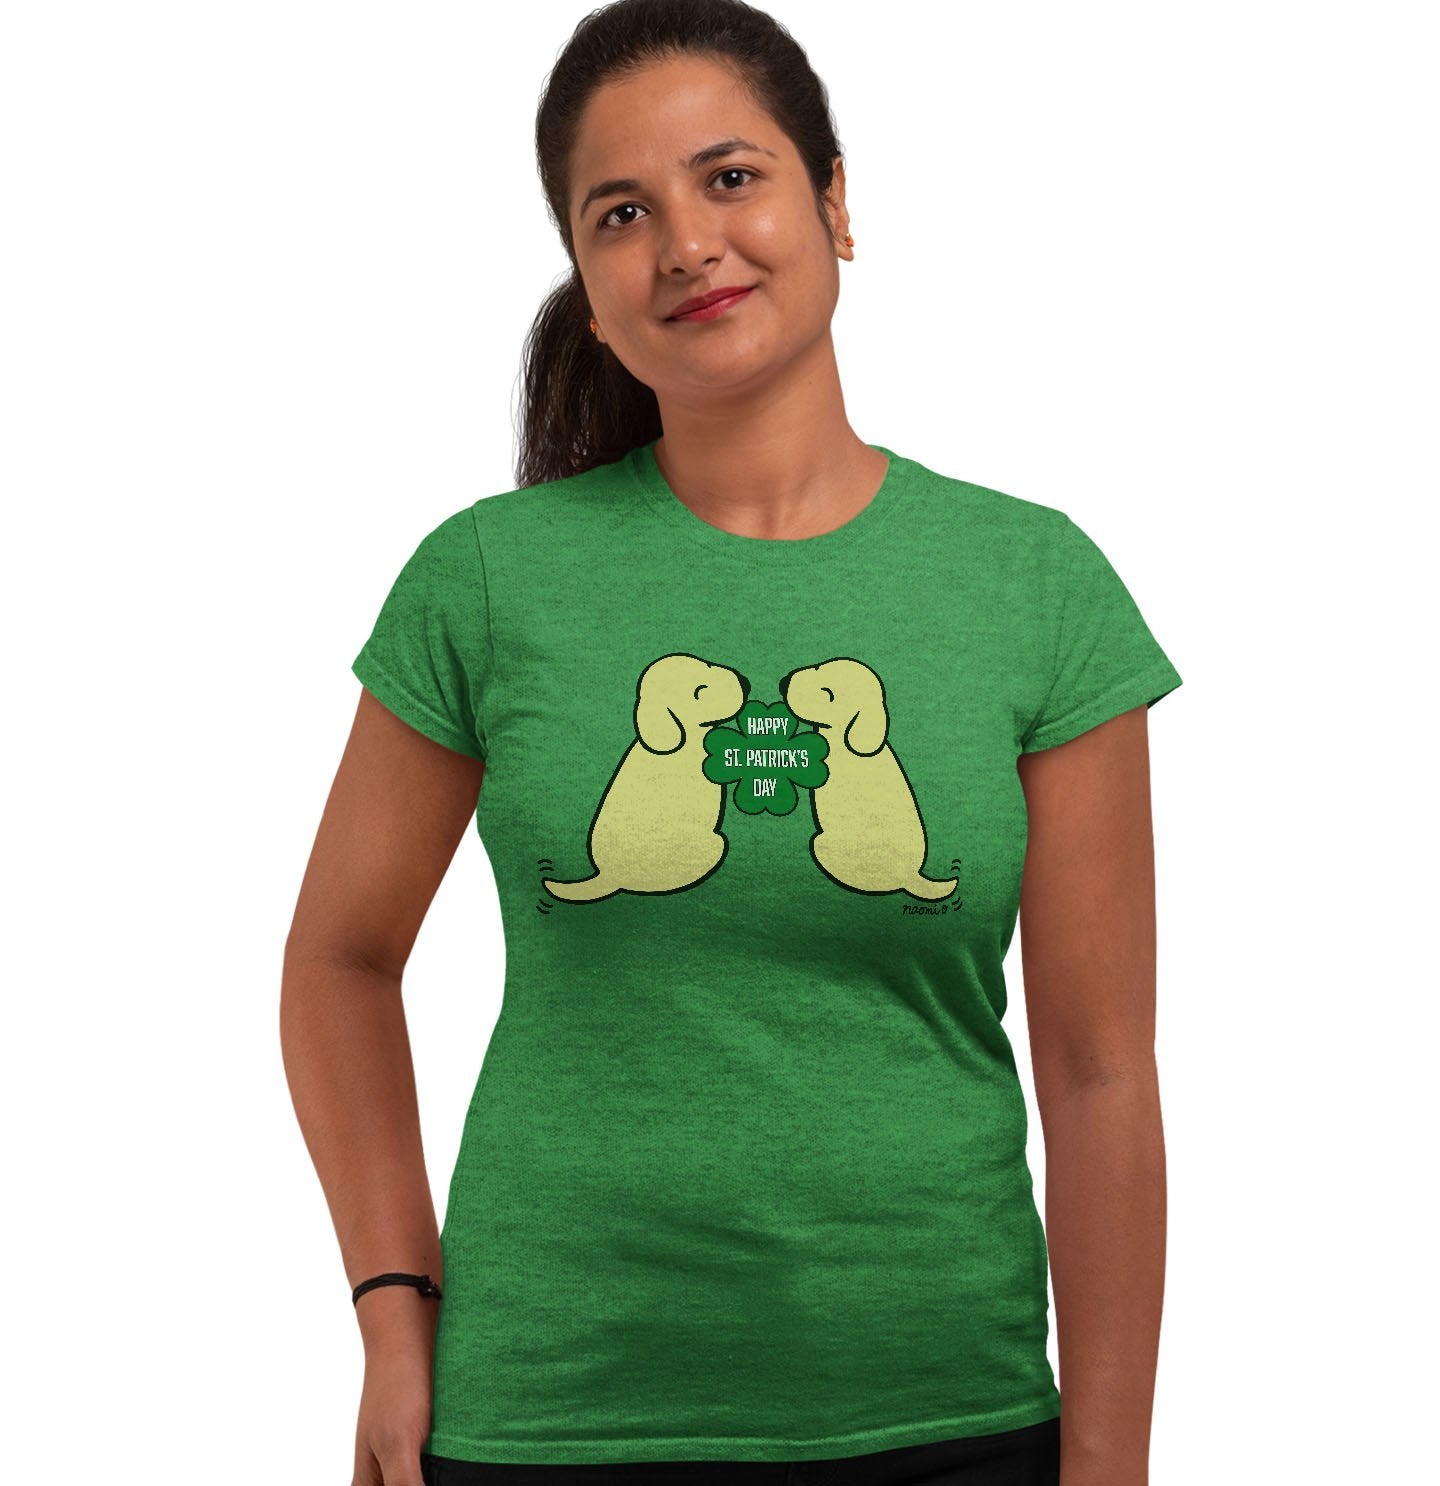 Happy St. Patrick's Day Yellow Lab Puppies - Women's Fitted T-Shirt